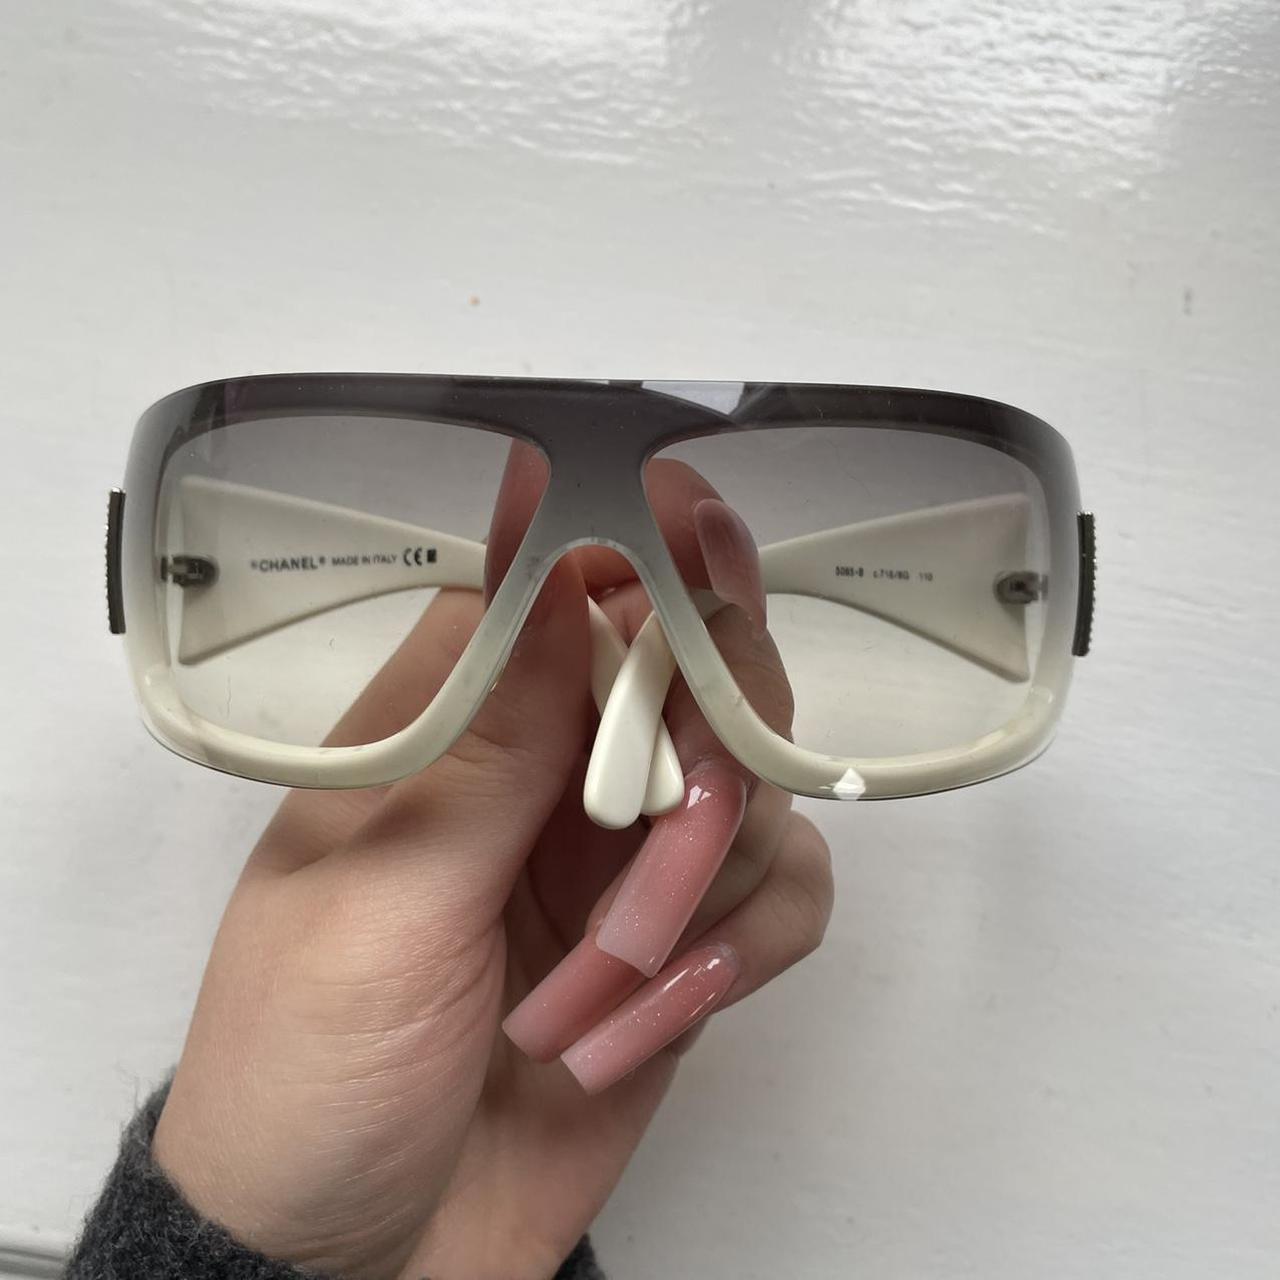 Chanel Vintage Sunglasses, Worn only for the first